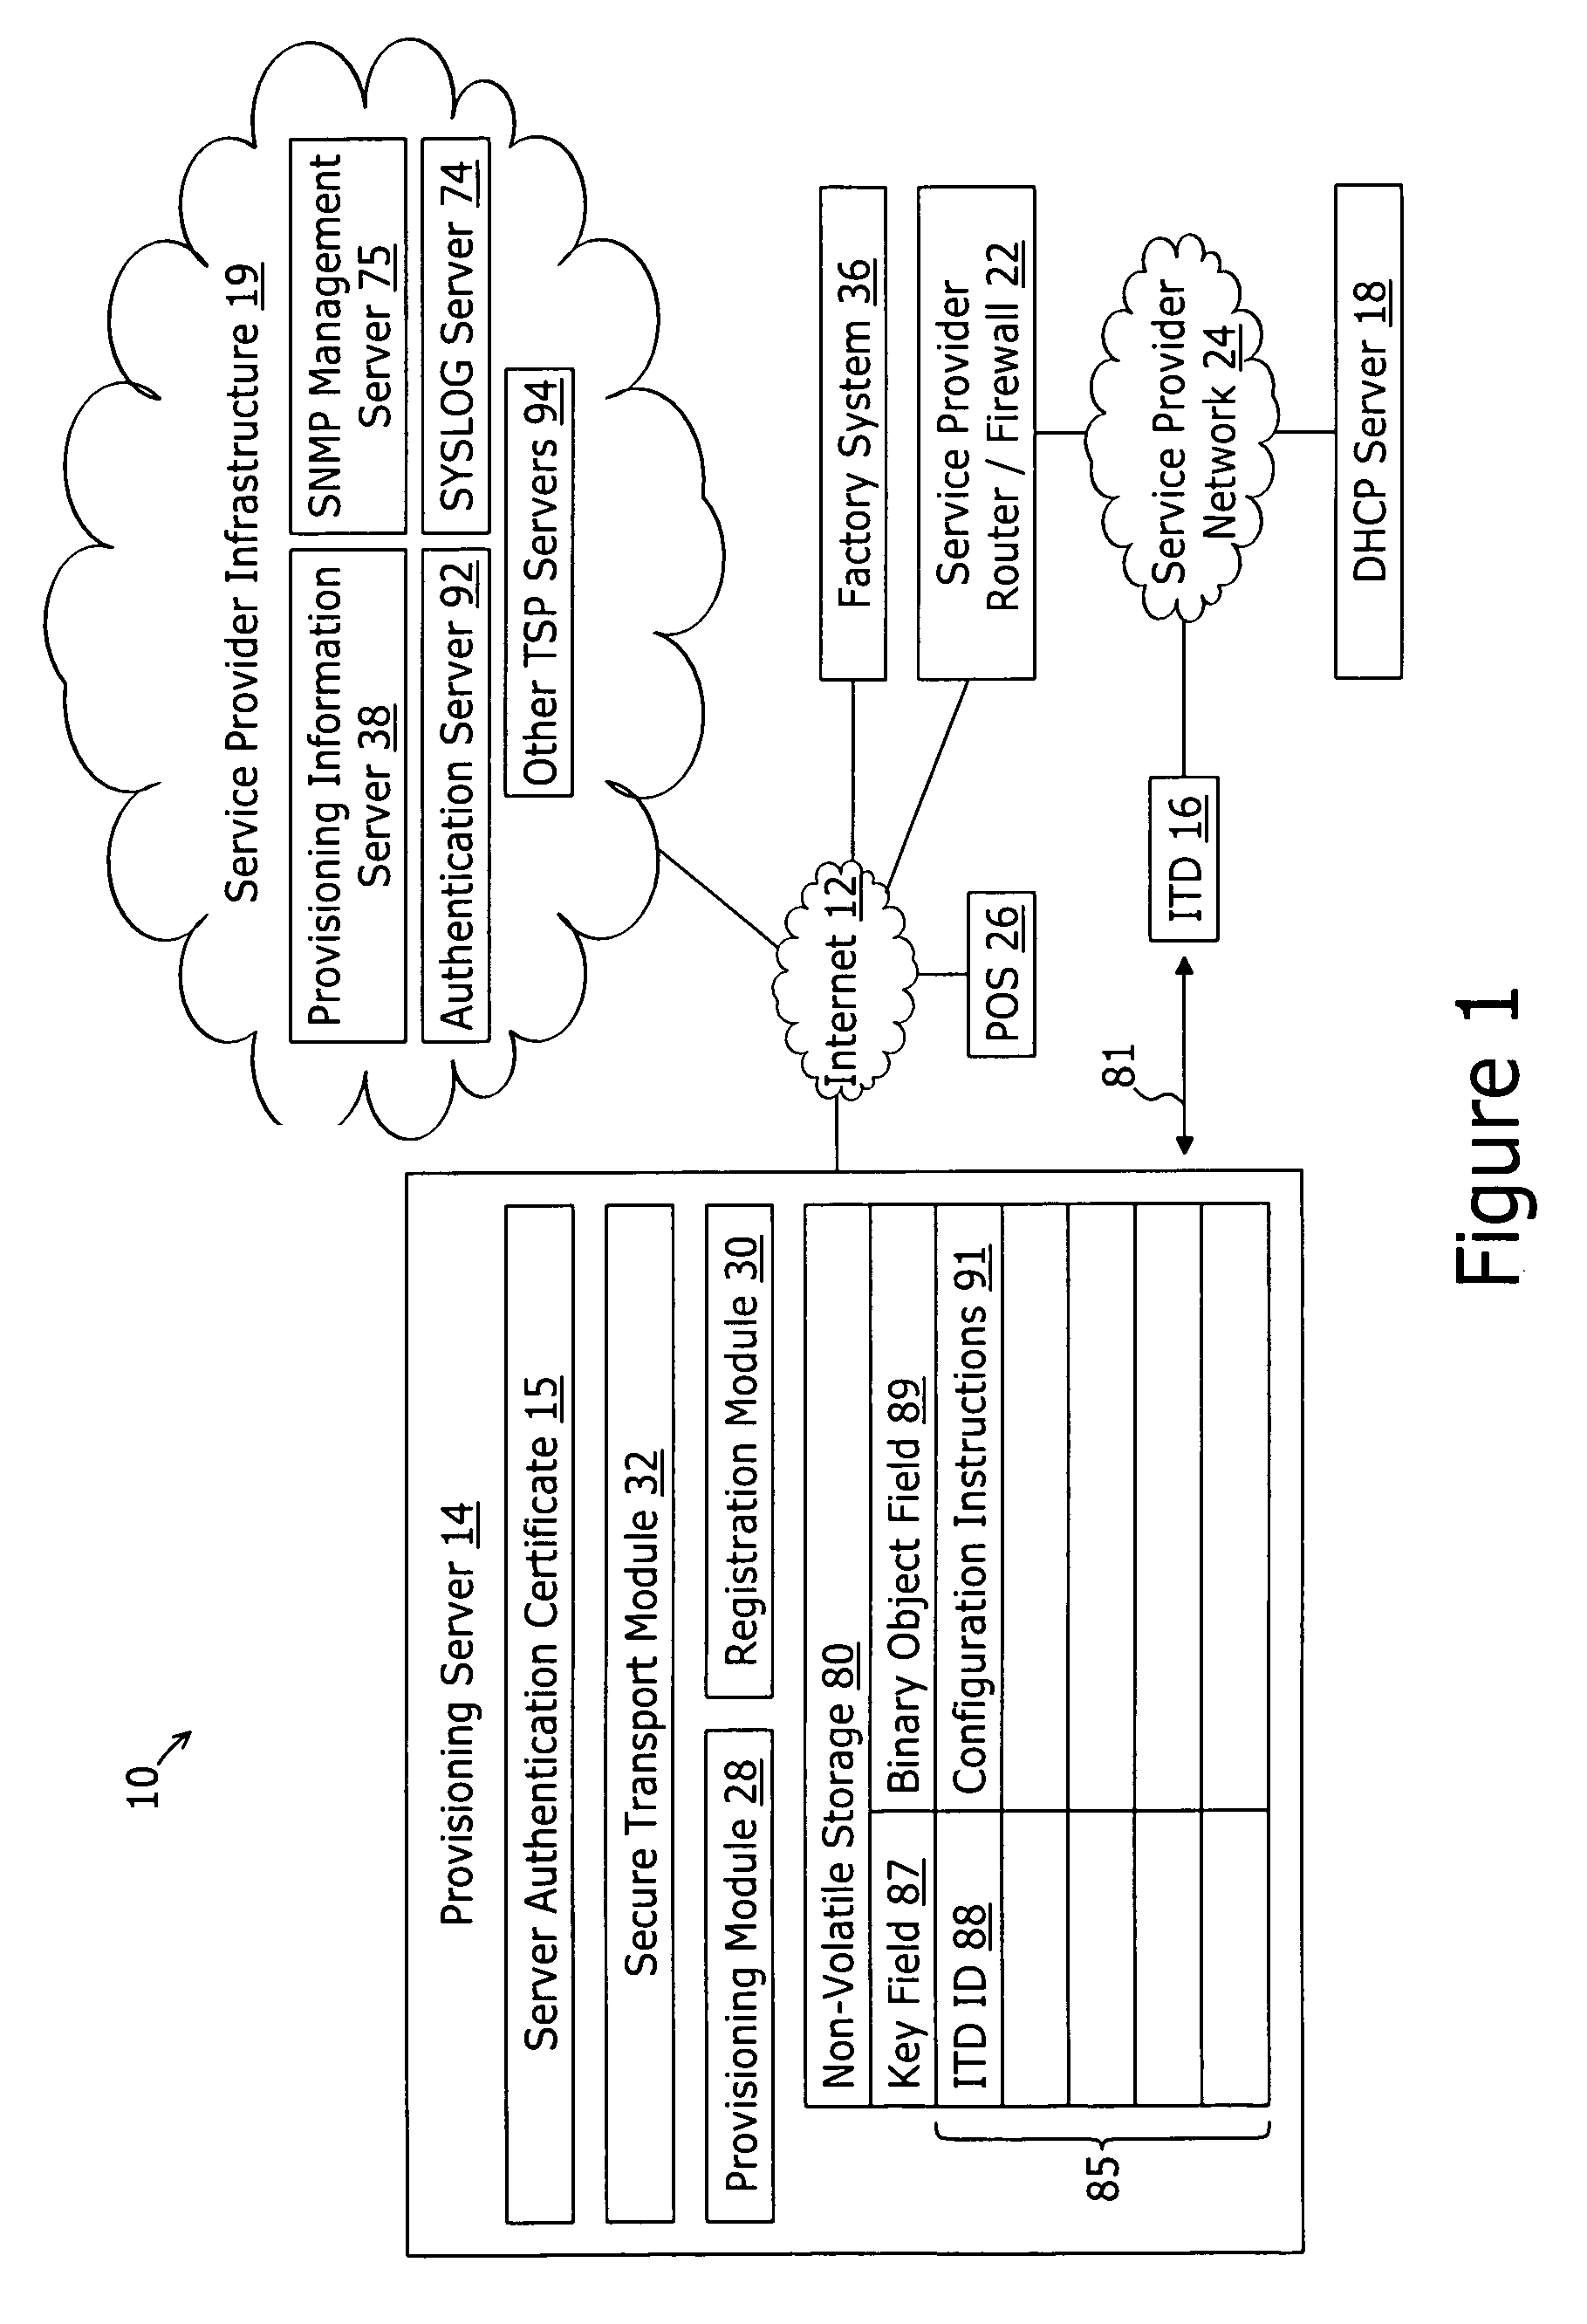 System and method for securely providing a configuration file over and open network